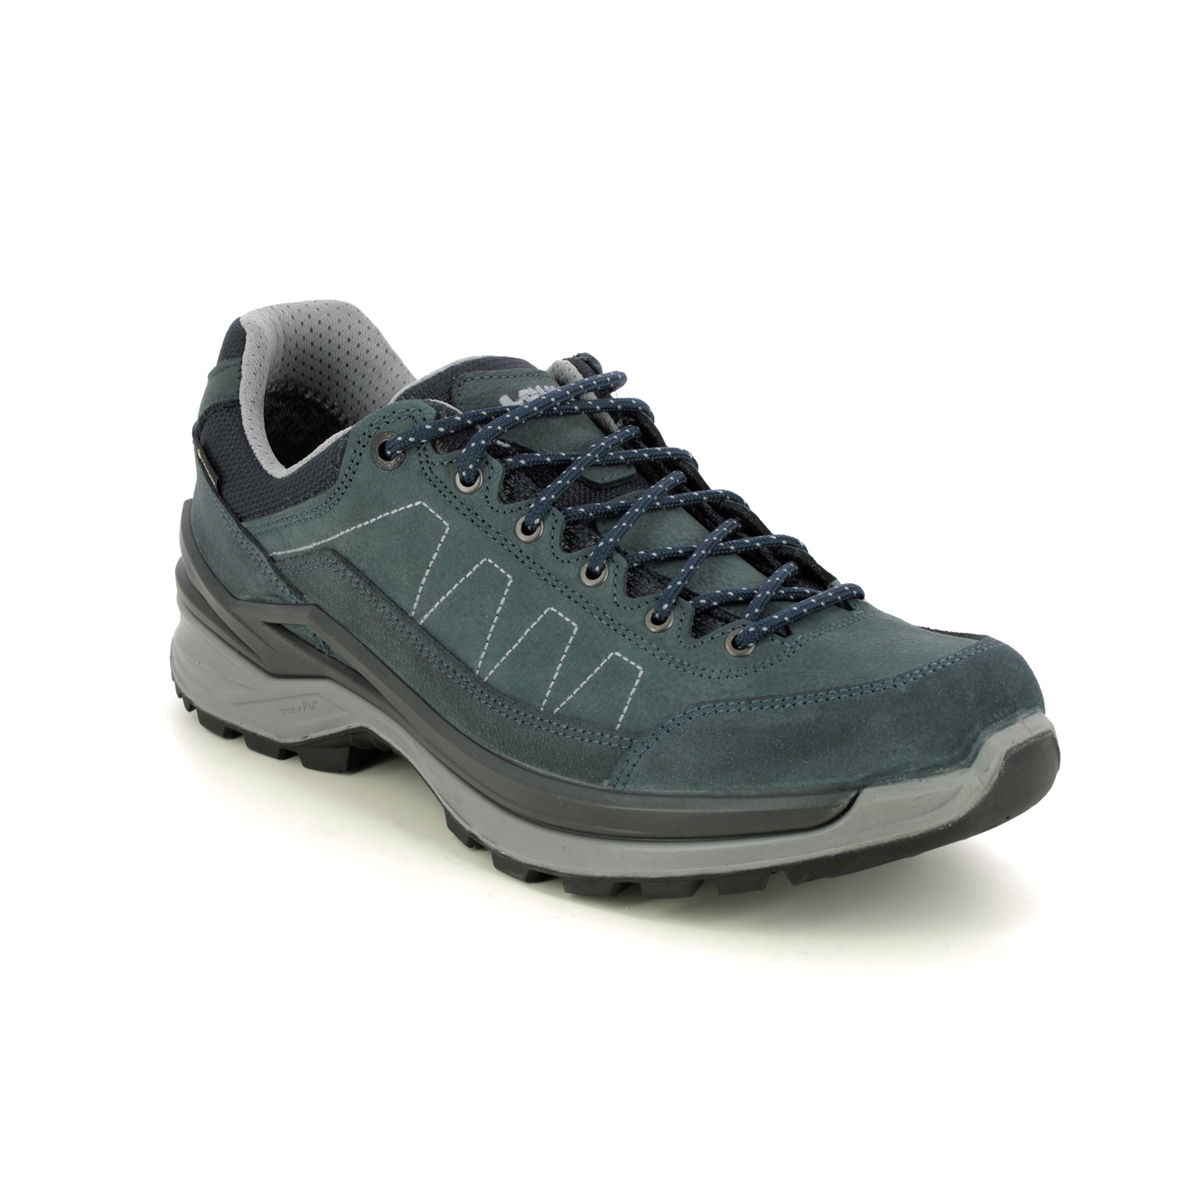 Lowa Toro Pro Gtx Lo Mens Walking Shoes In Navy Leather 310931-6130 In Regular Fit Mens Uk Size 8.5 In Plain Navy Leather